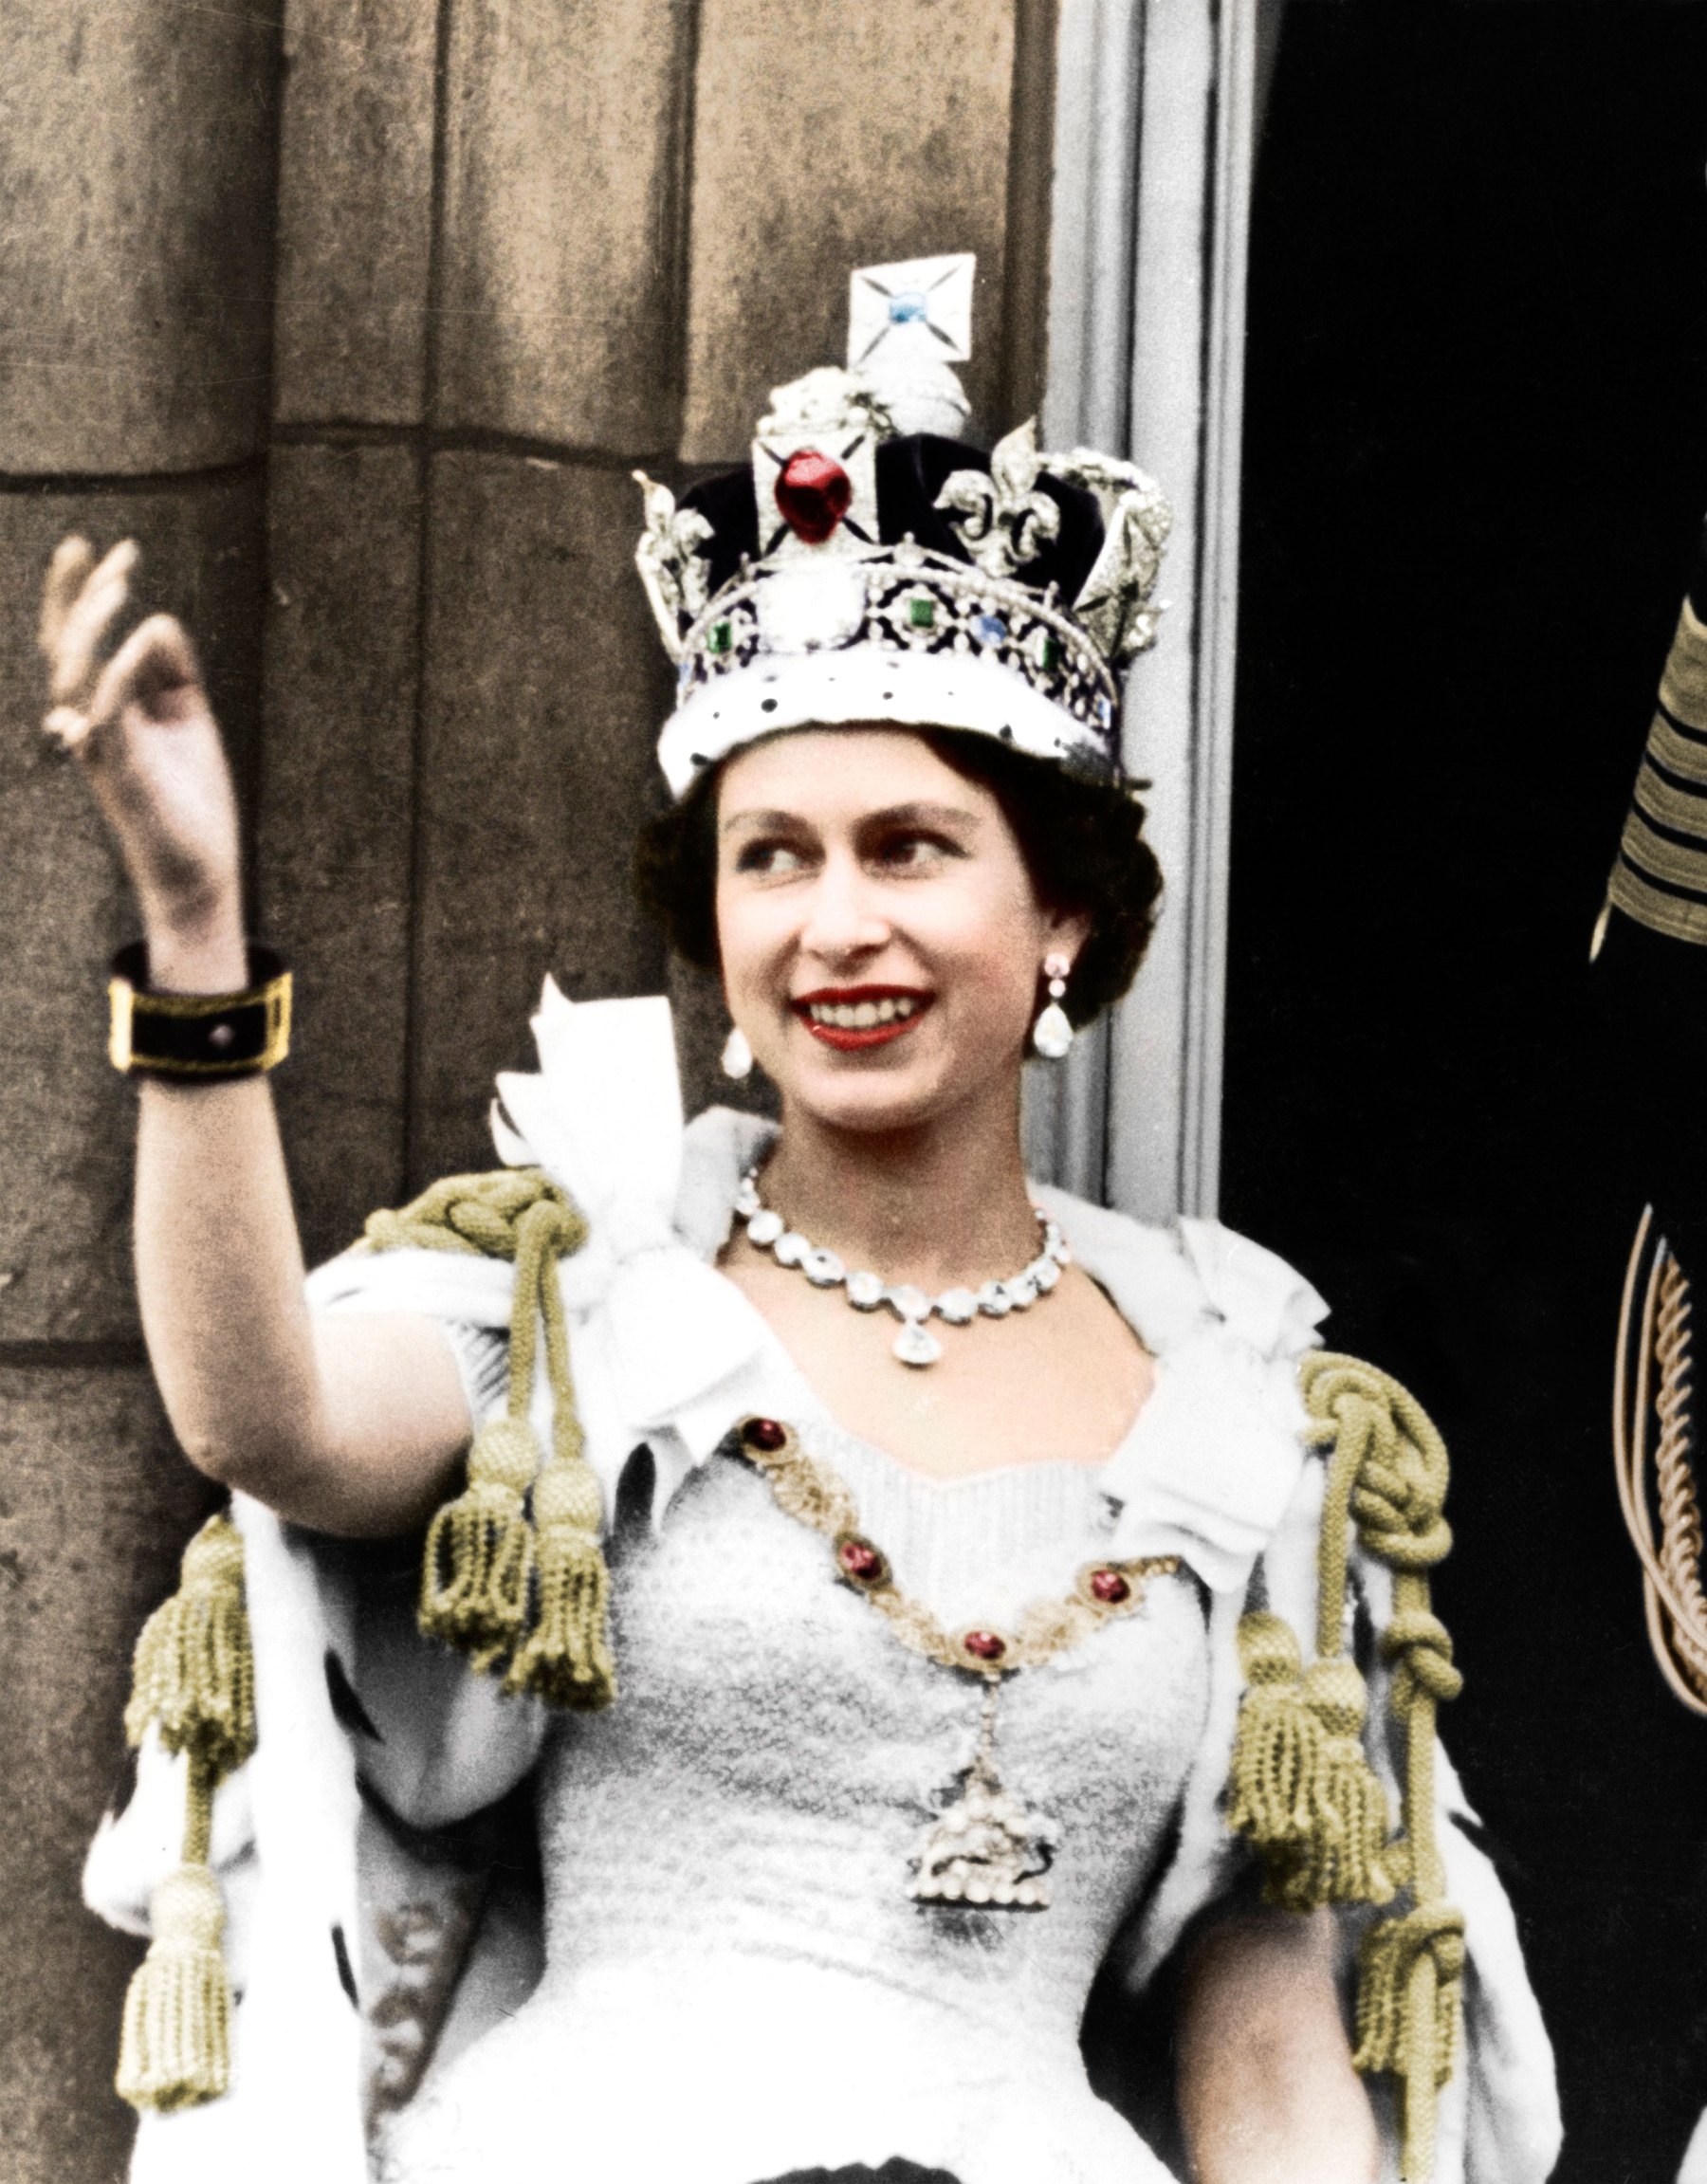 10 Little-Known Facts About Queen Elizabeth II’s 1953 Coronation